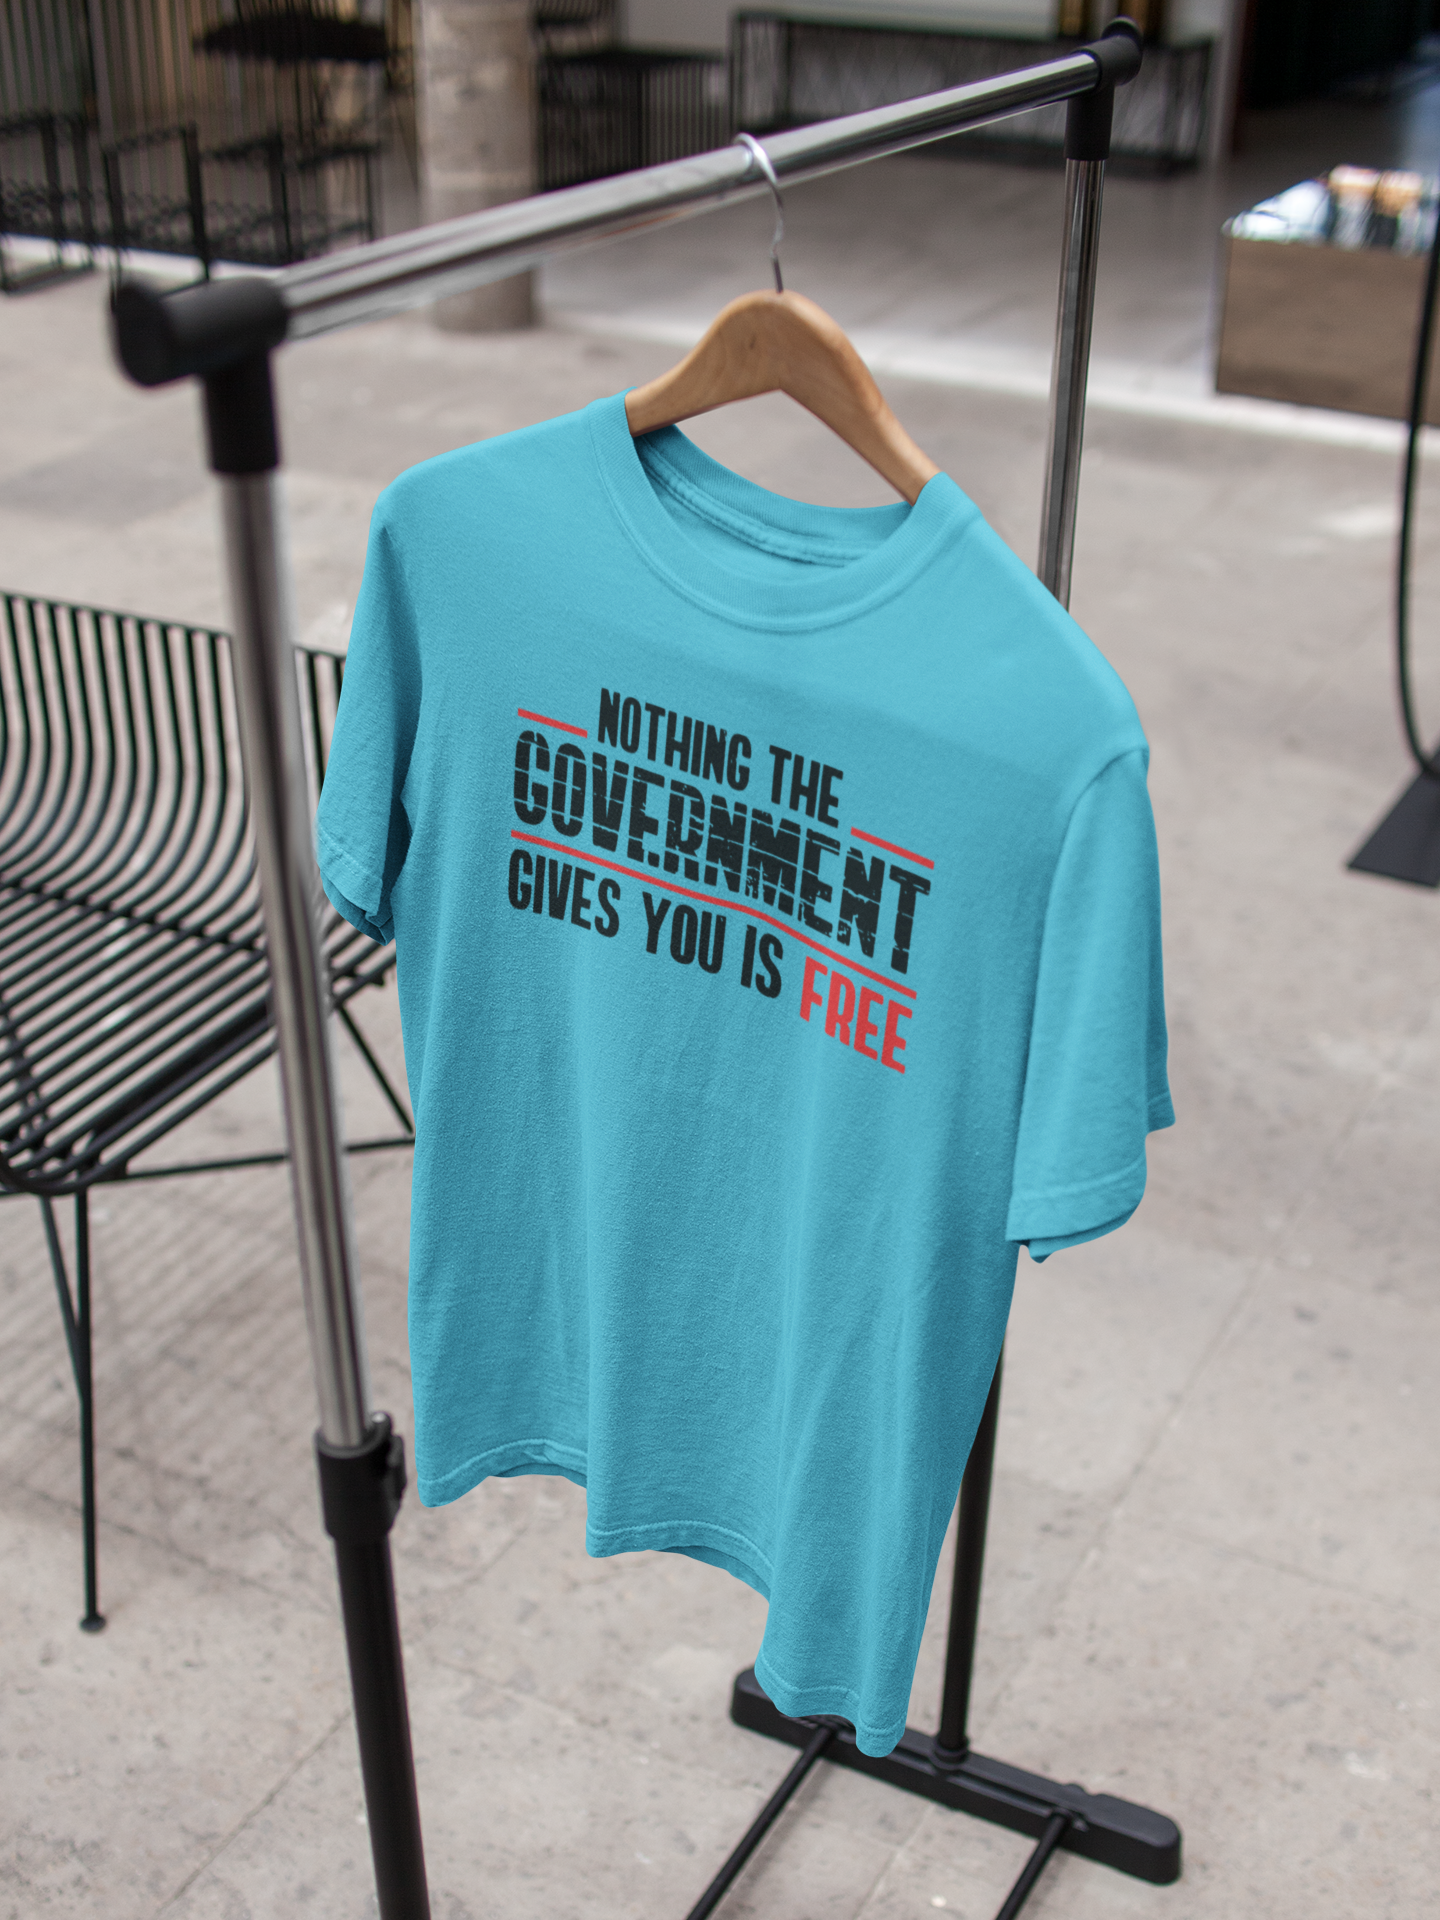 Nothing The Government Gives You Is Free Anti Government Mens Half Sleeves T-shirt- FunkyTeesClub